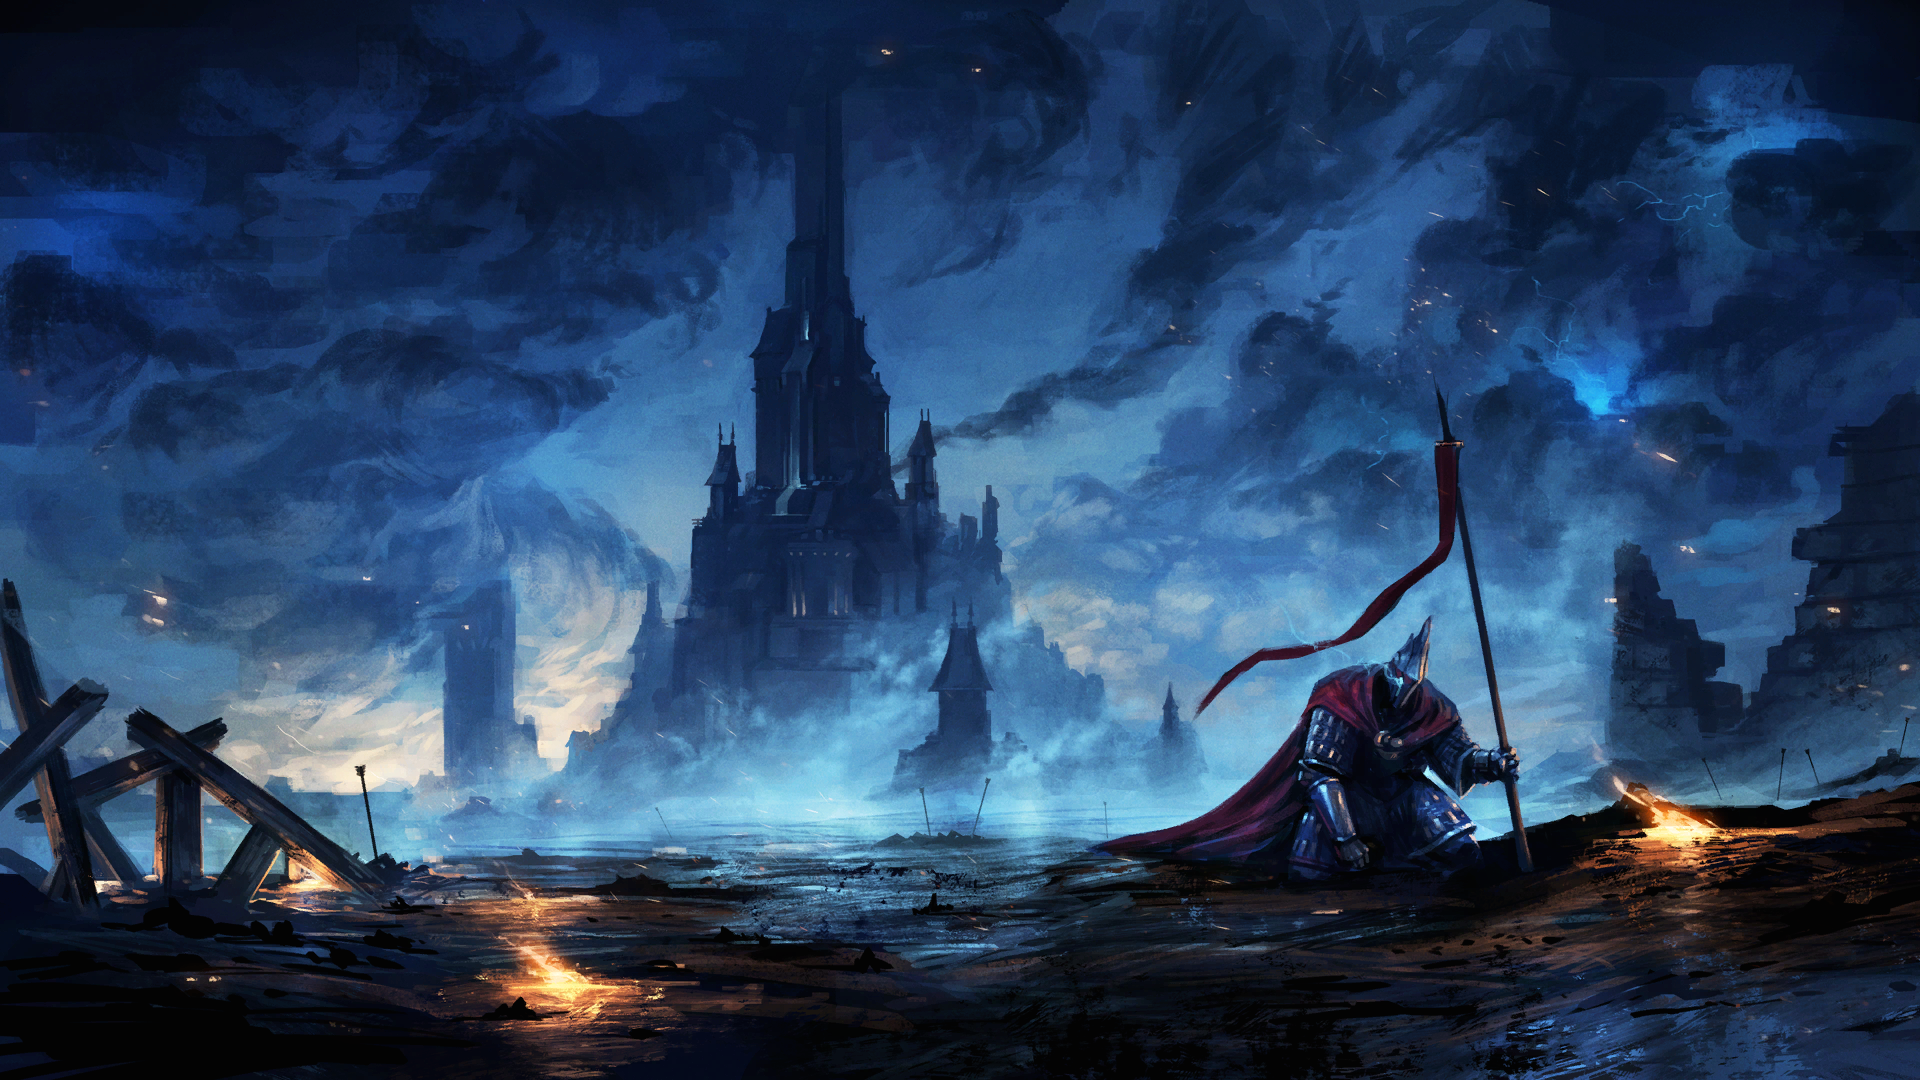 My wallpaper (Concept art from the game Endless Legend). Fantasy setting, Fantasy landscape, Concept art